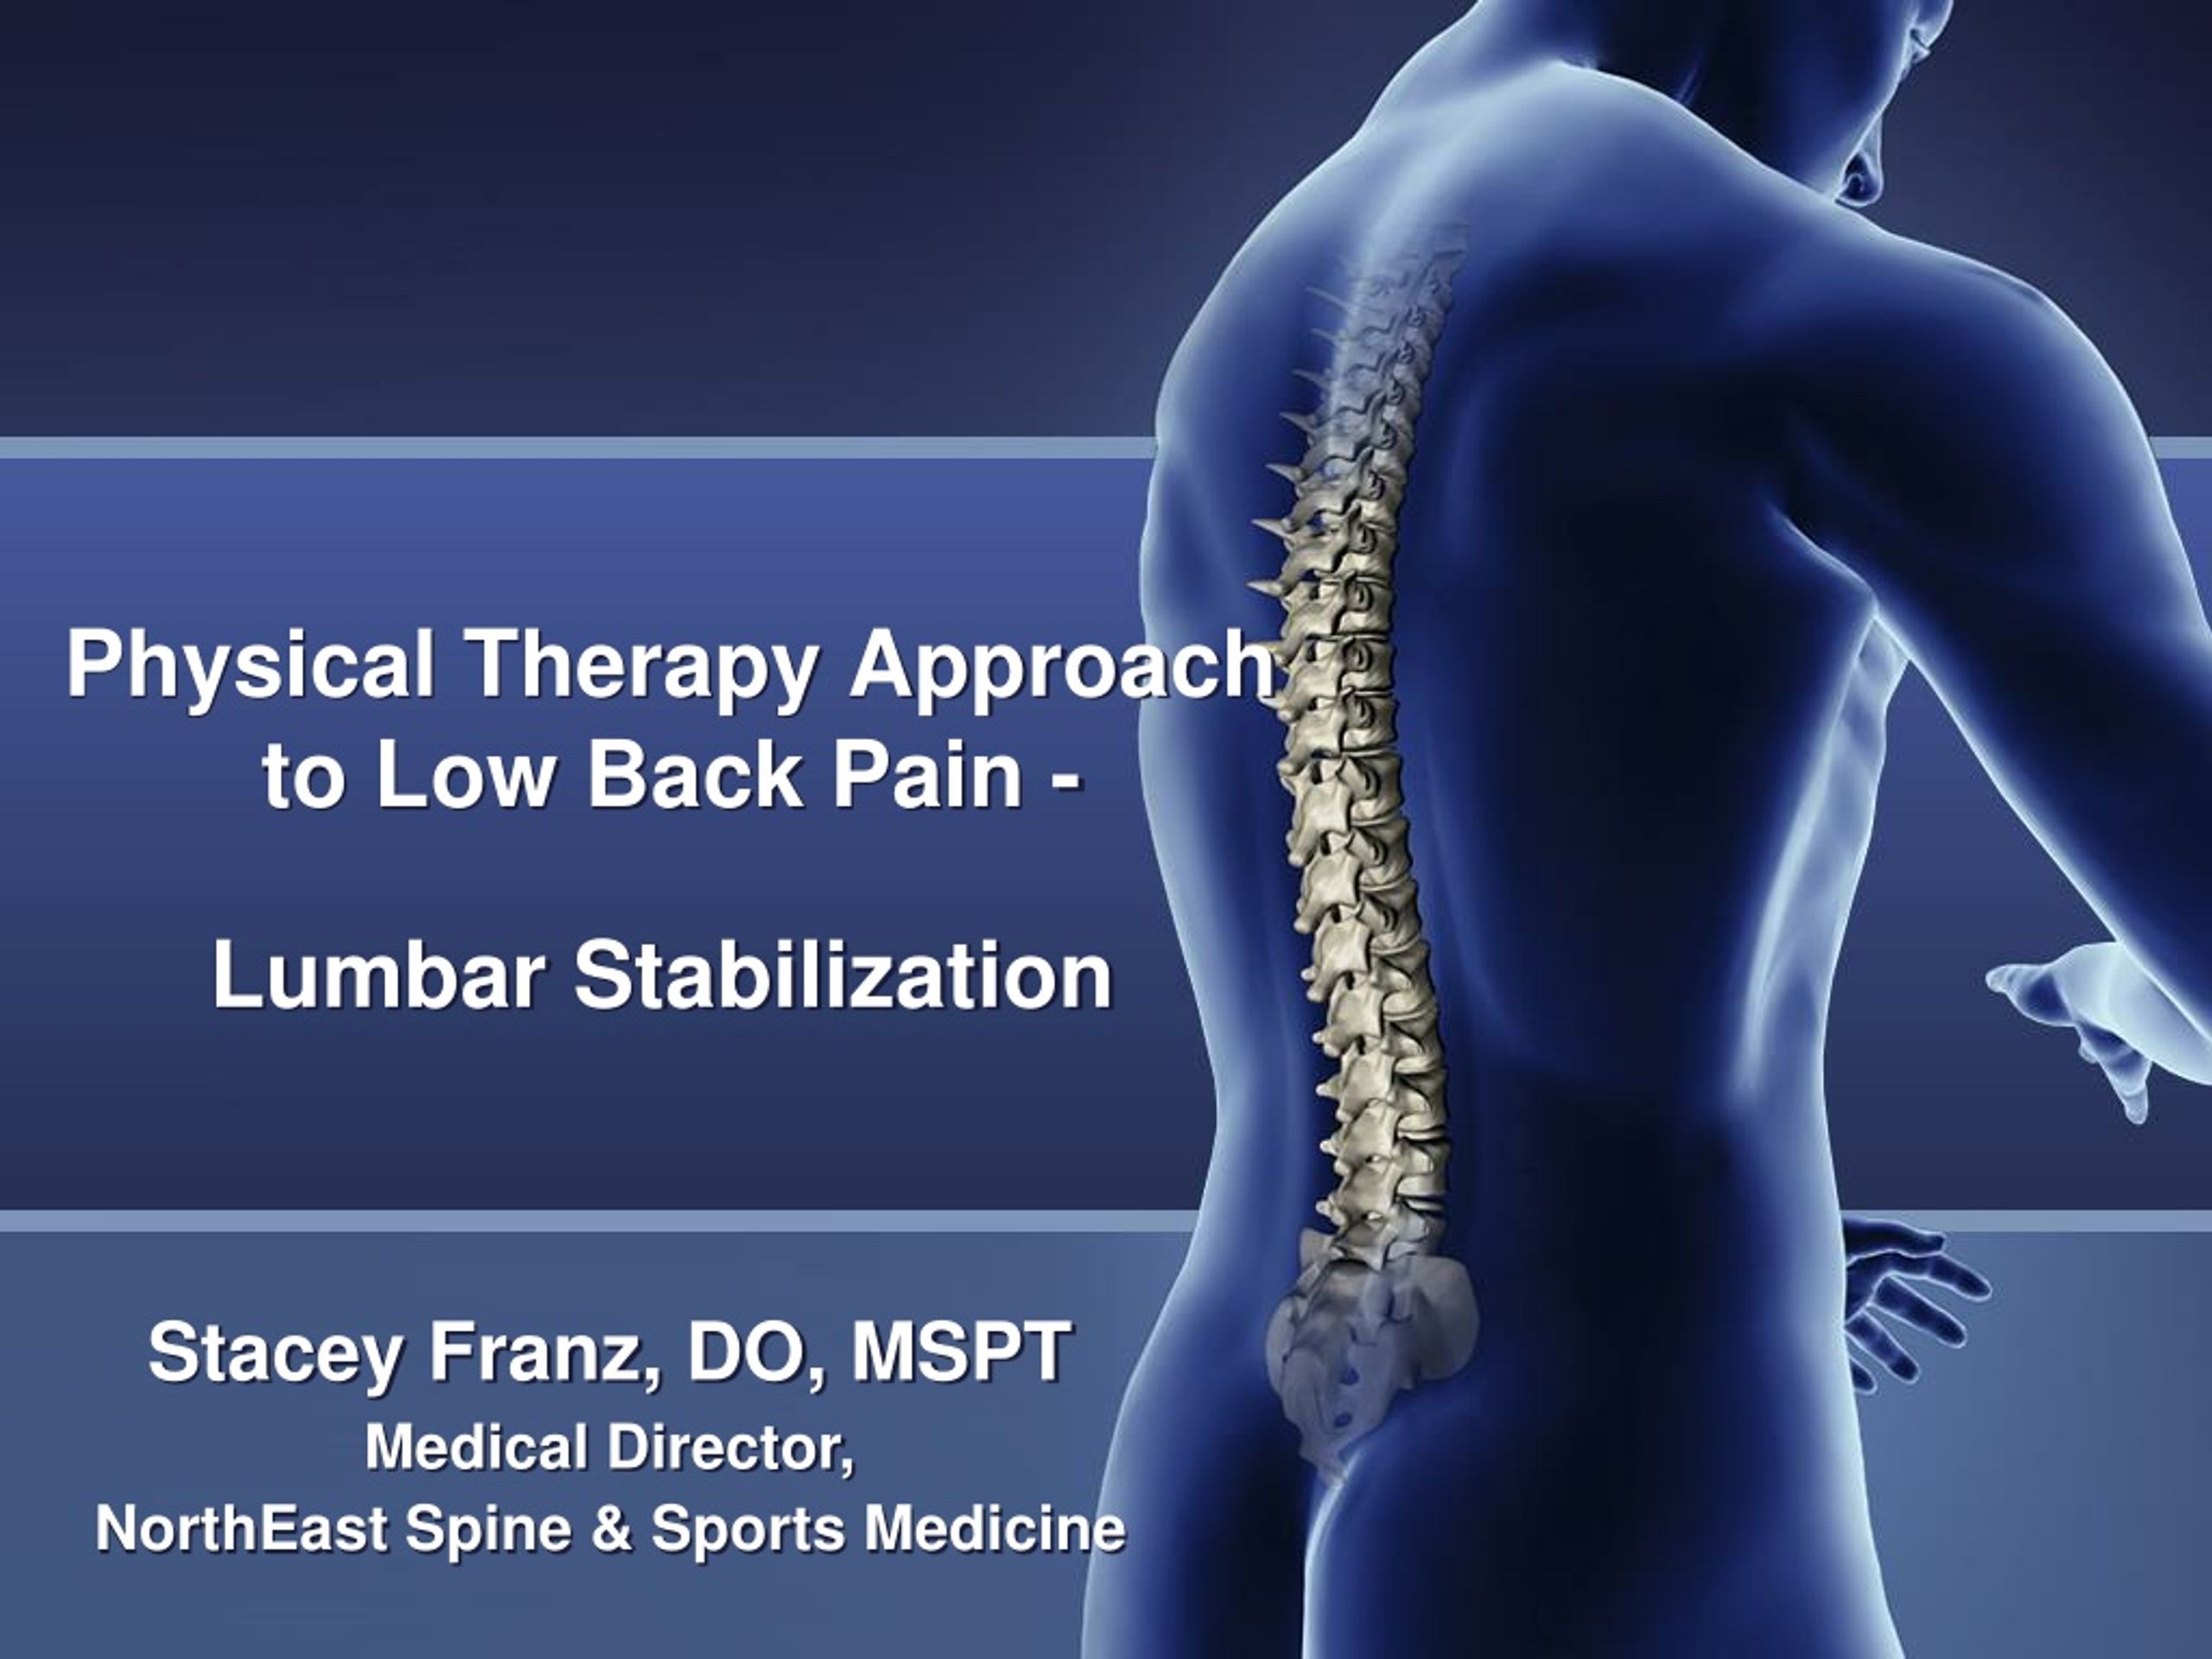 PPT - Approach to a Patient with Unilateral Flank Pain PowerPoint  Presentation - ID:2239502